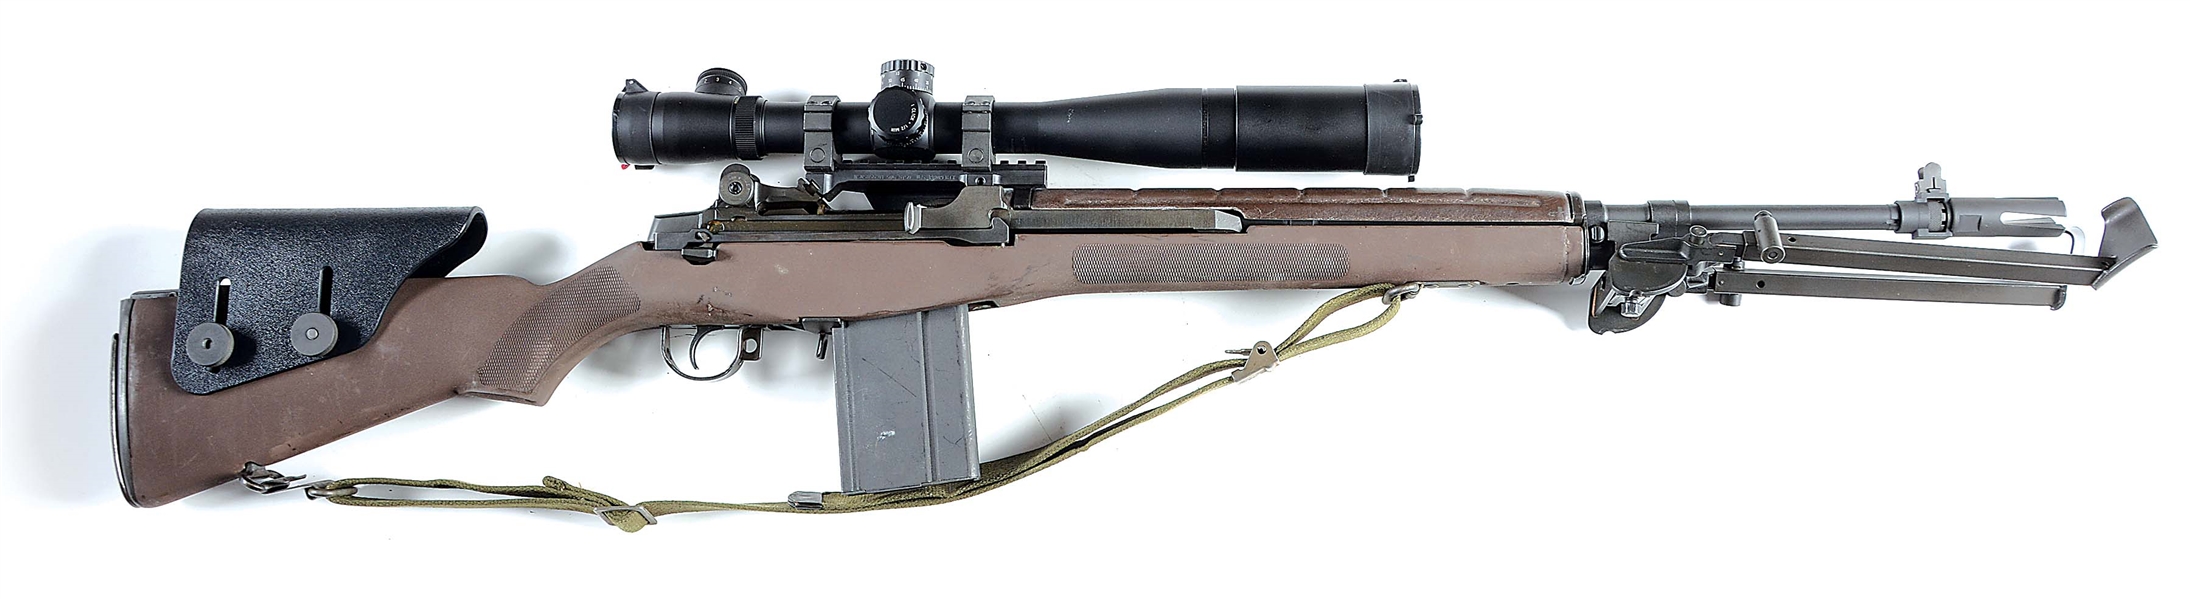 (M) SCOPED LRB M1A SEMI-AUTOMATIC RIFLE WITH ACCESSORIES.